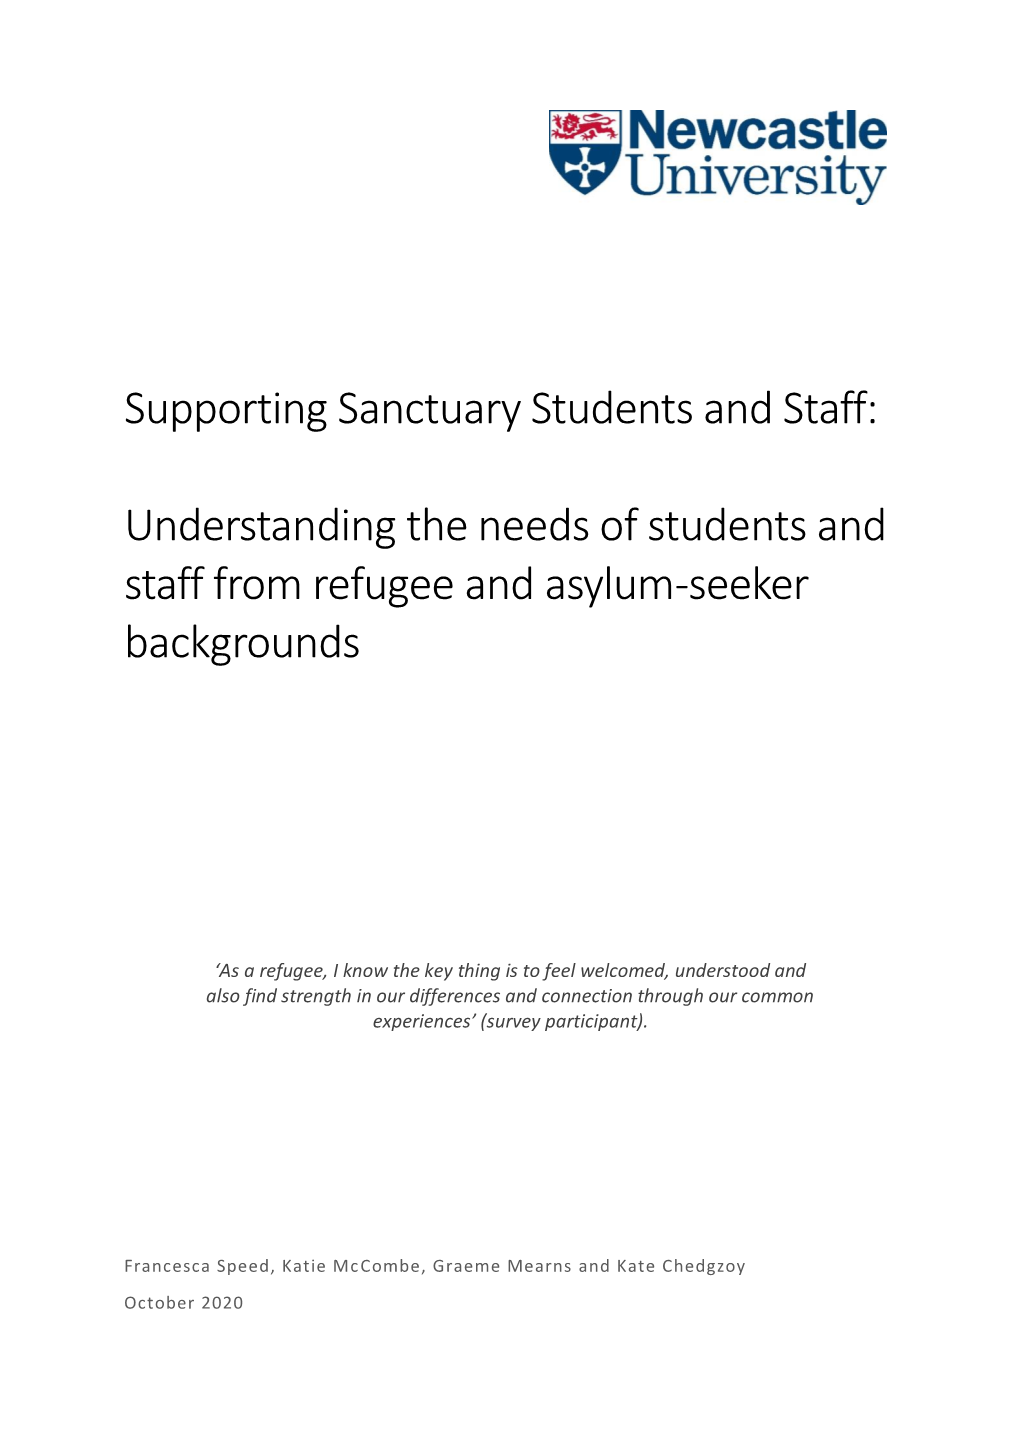 Understanding the Needs of Students and Staff from Refugee and Asylum-Seeker Backgrounds